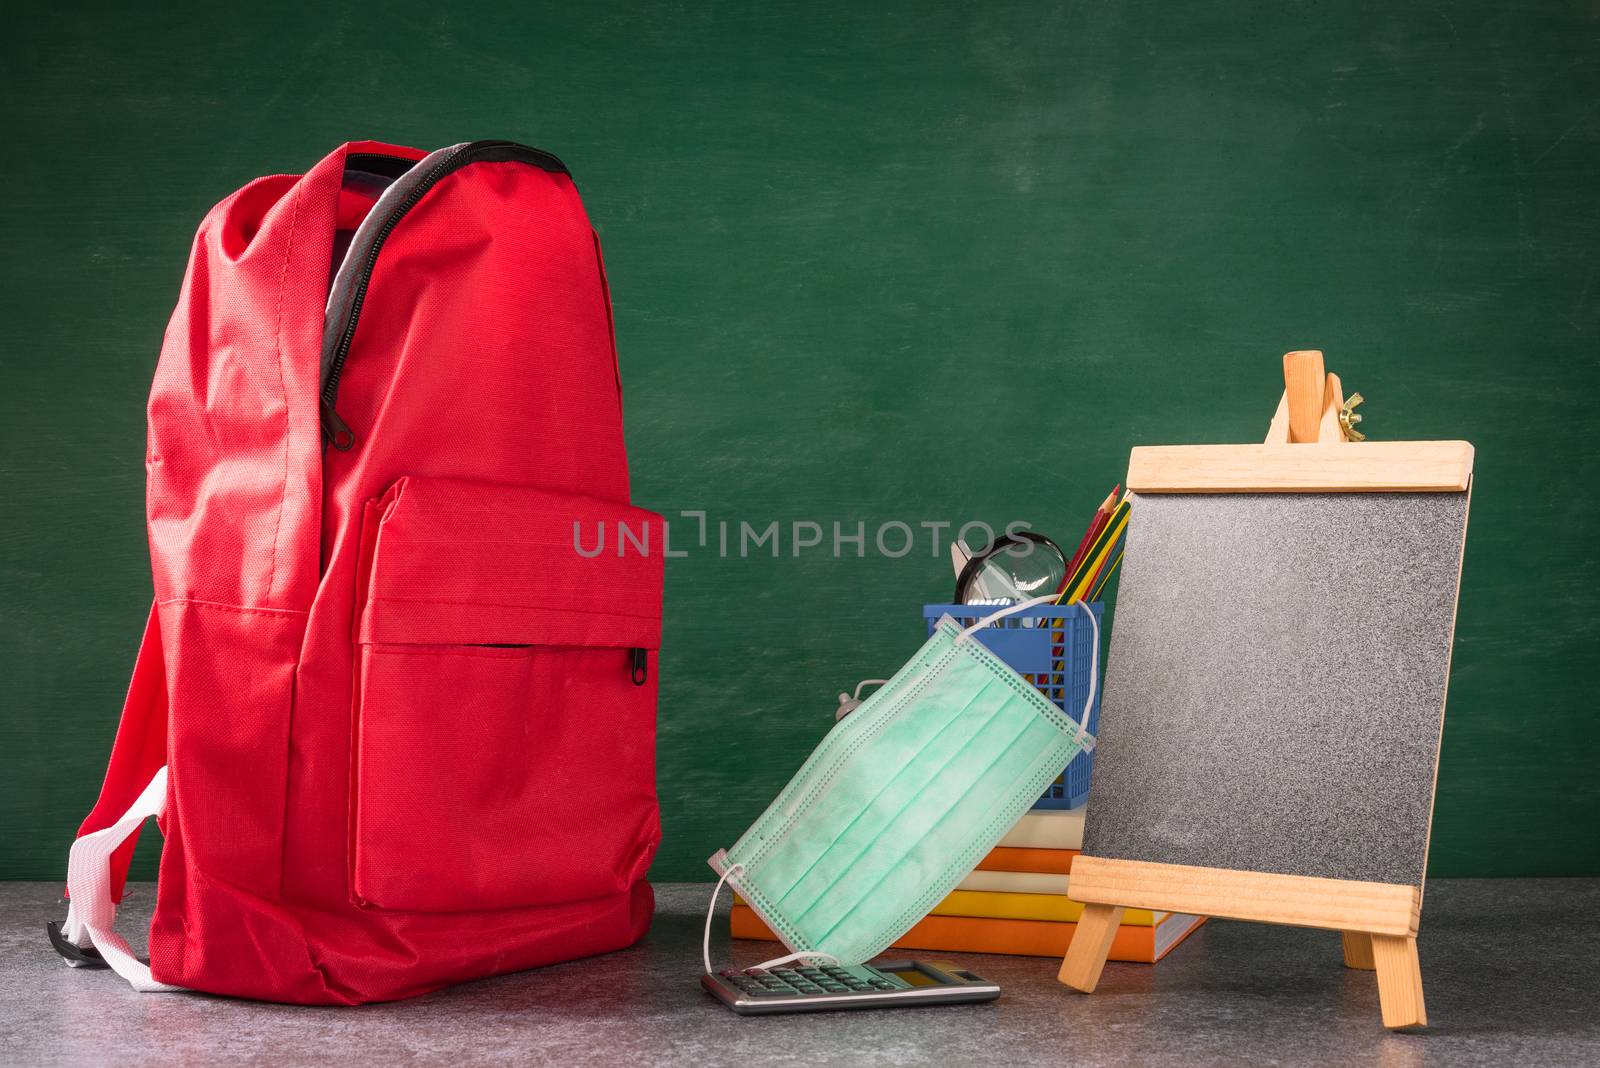 Front school backpack and accessories with face mask protect on desk at green chalkboard, student bag at classroom backboard, Back to school education new normal outbreak COVID-19 or coronavirus